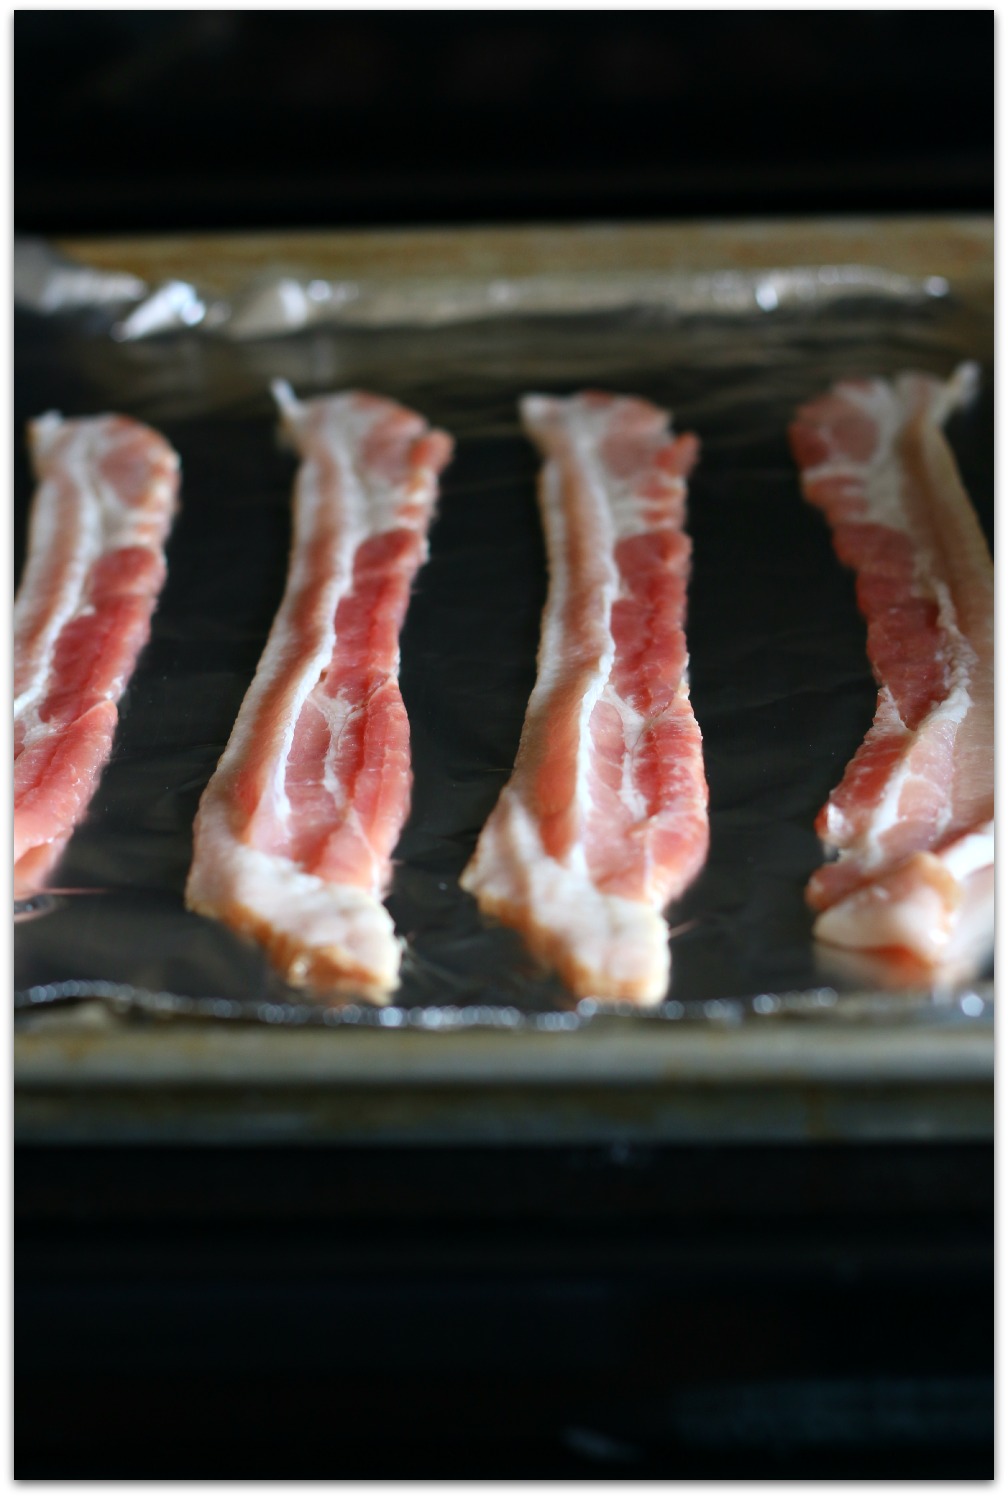 How to cook bacon in the oven. Easier and cleaner too.